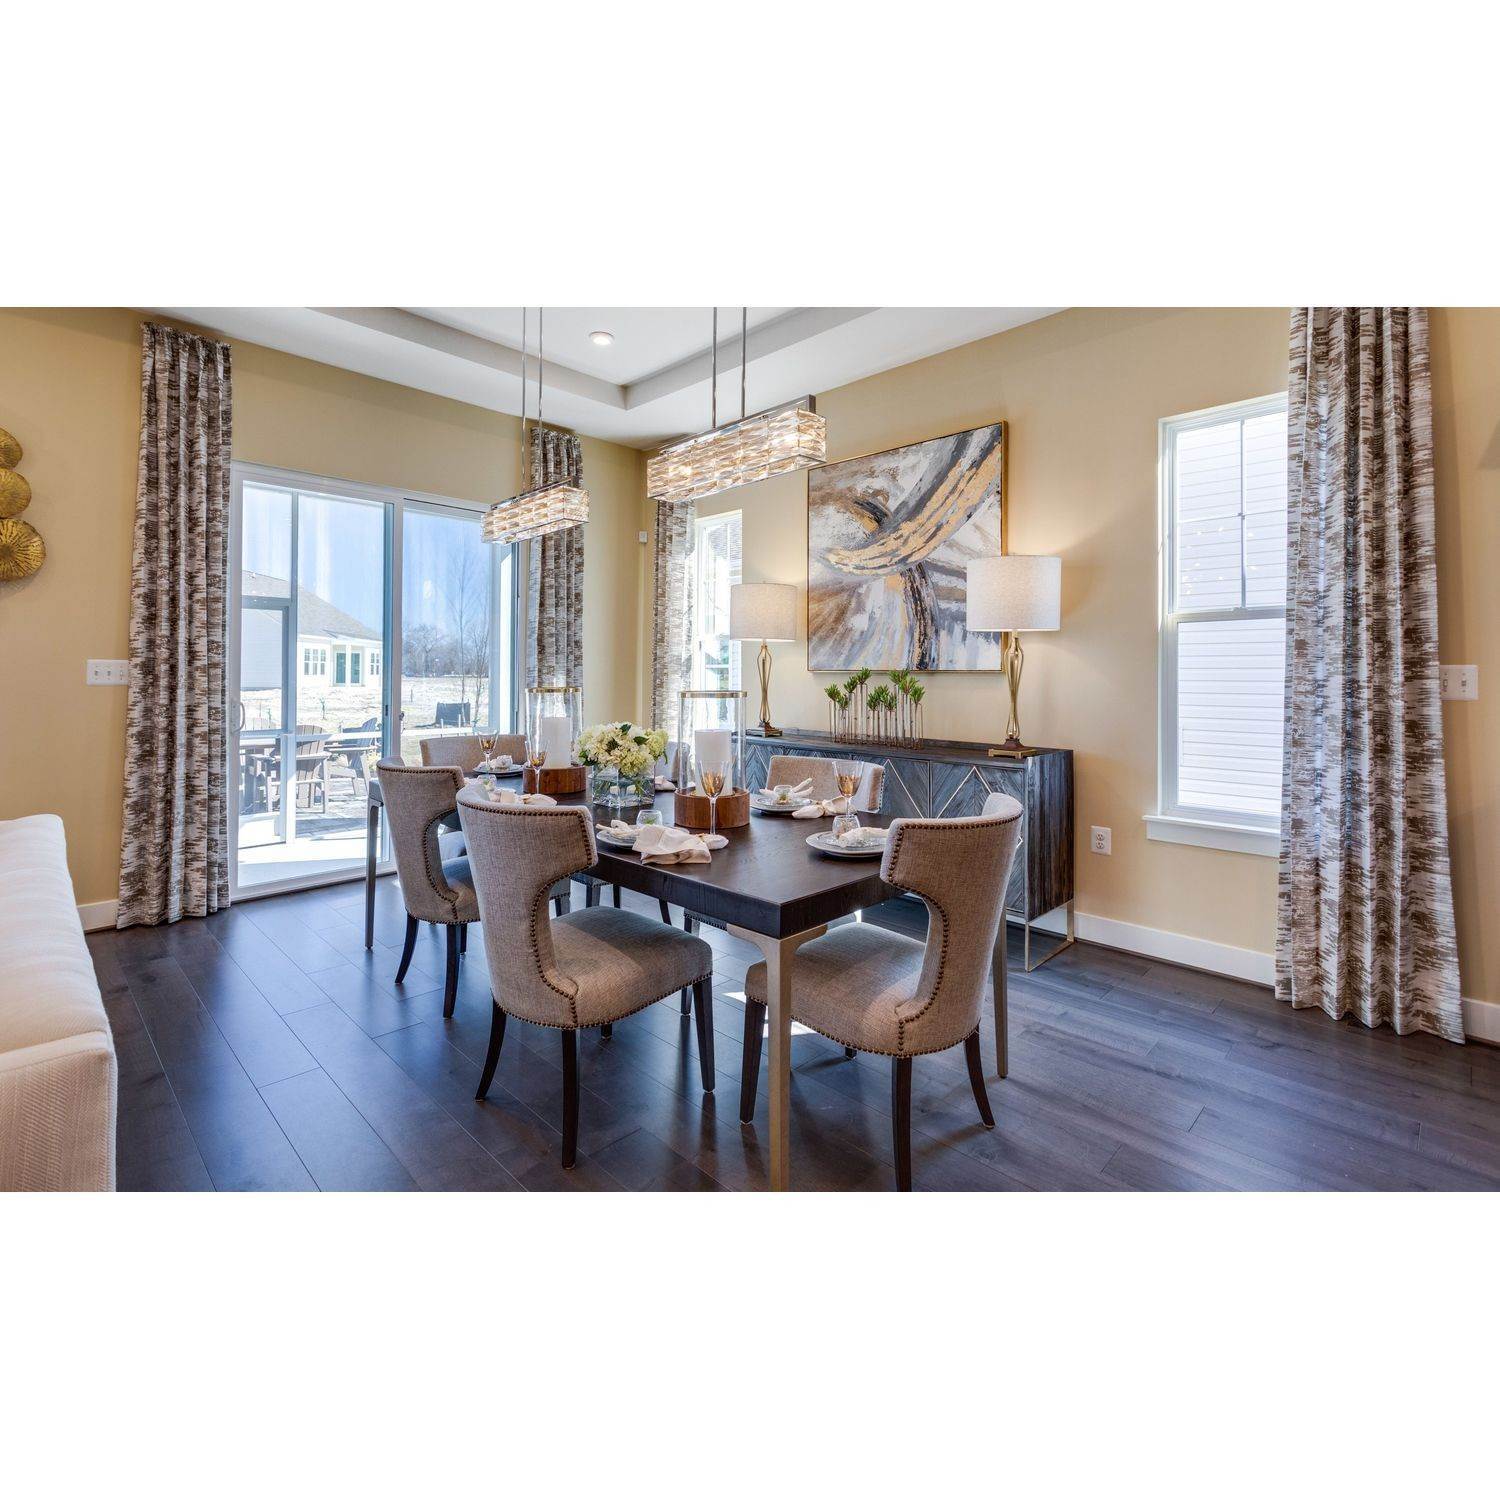 3. Single Family for Sale at K. Hovnanian's® Four Seasons At Kent Island - Sing 203 Bayberry Drive, Chester, MD 21619